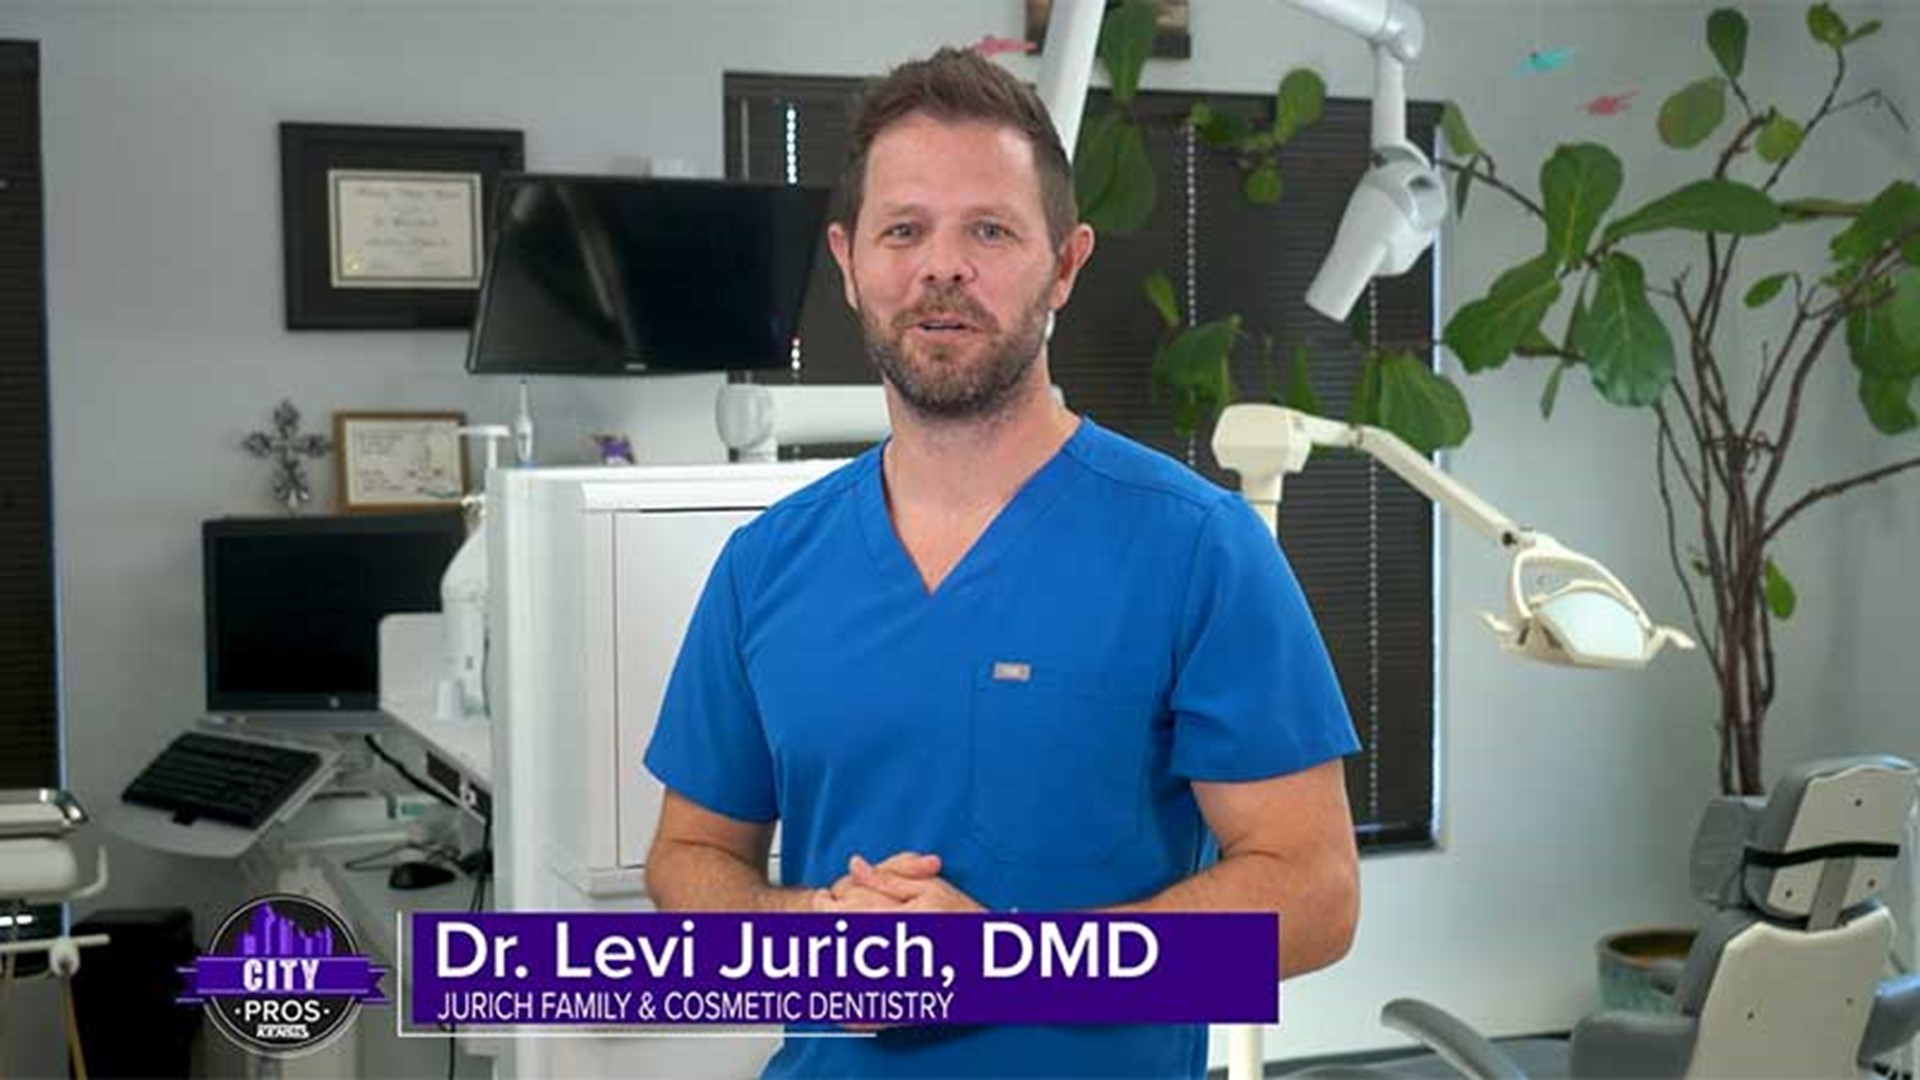 Jurich Dentral is using laser dentistry for certain procedures to provide better precision and improved comfort.